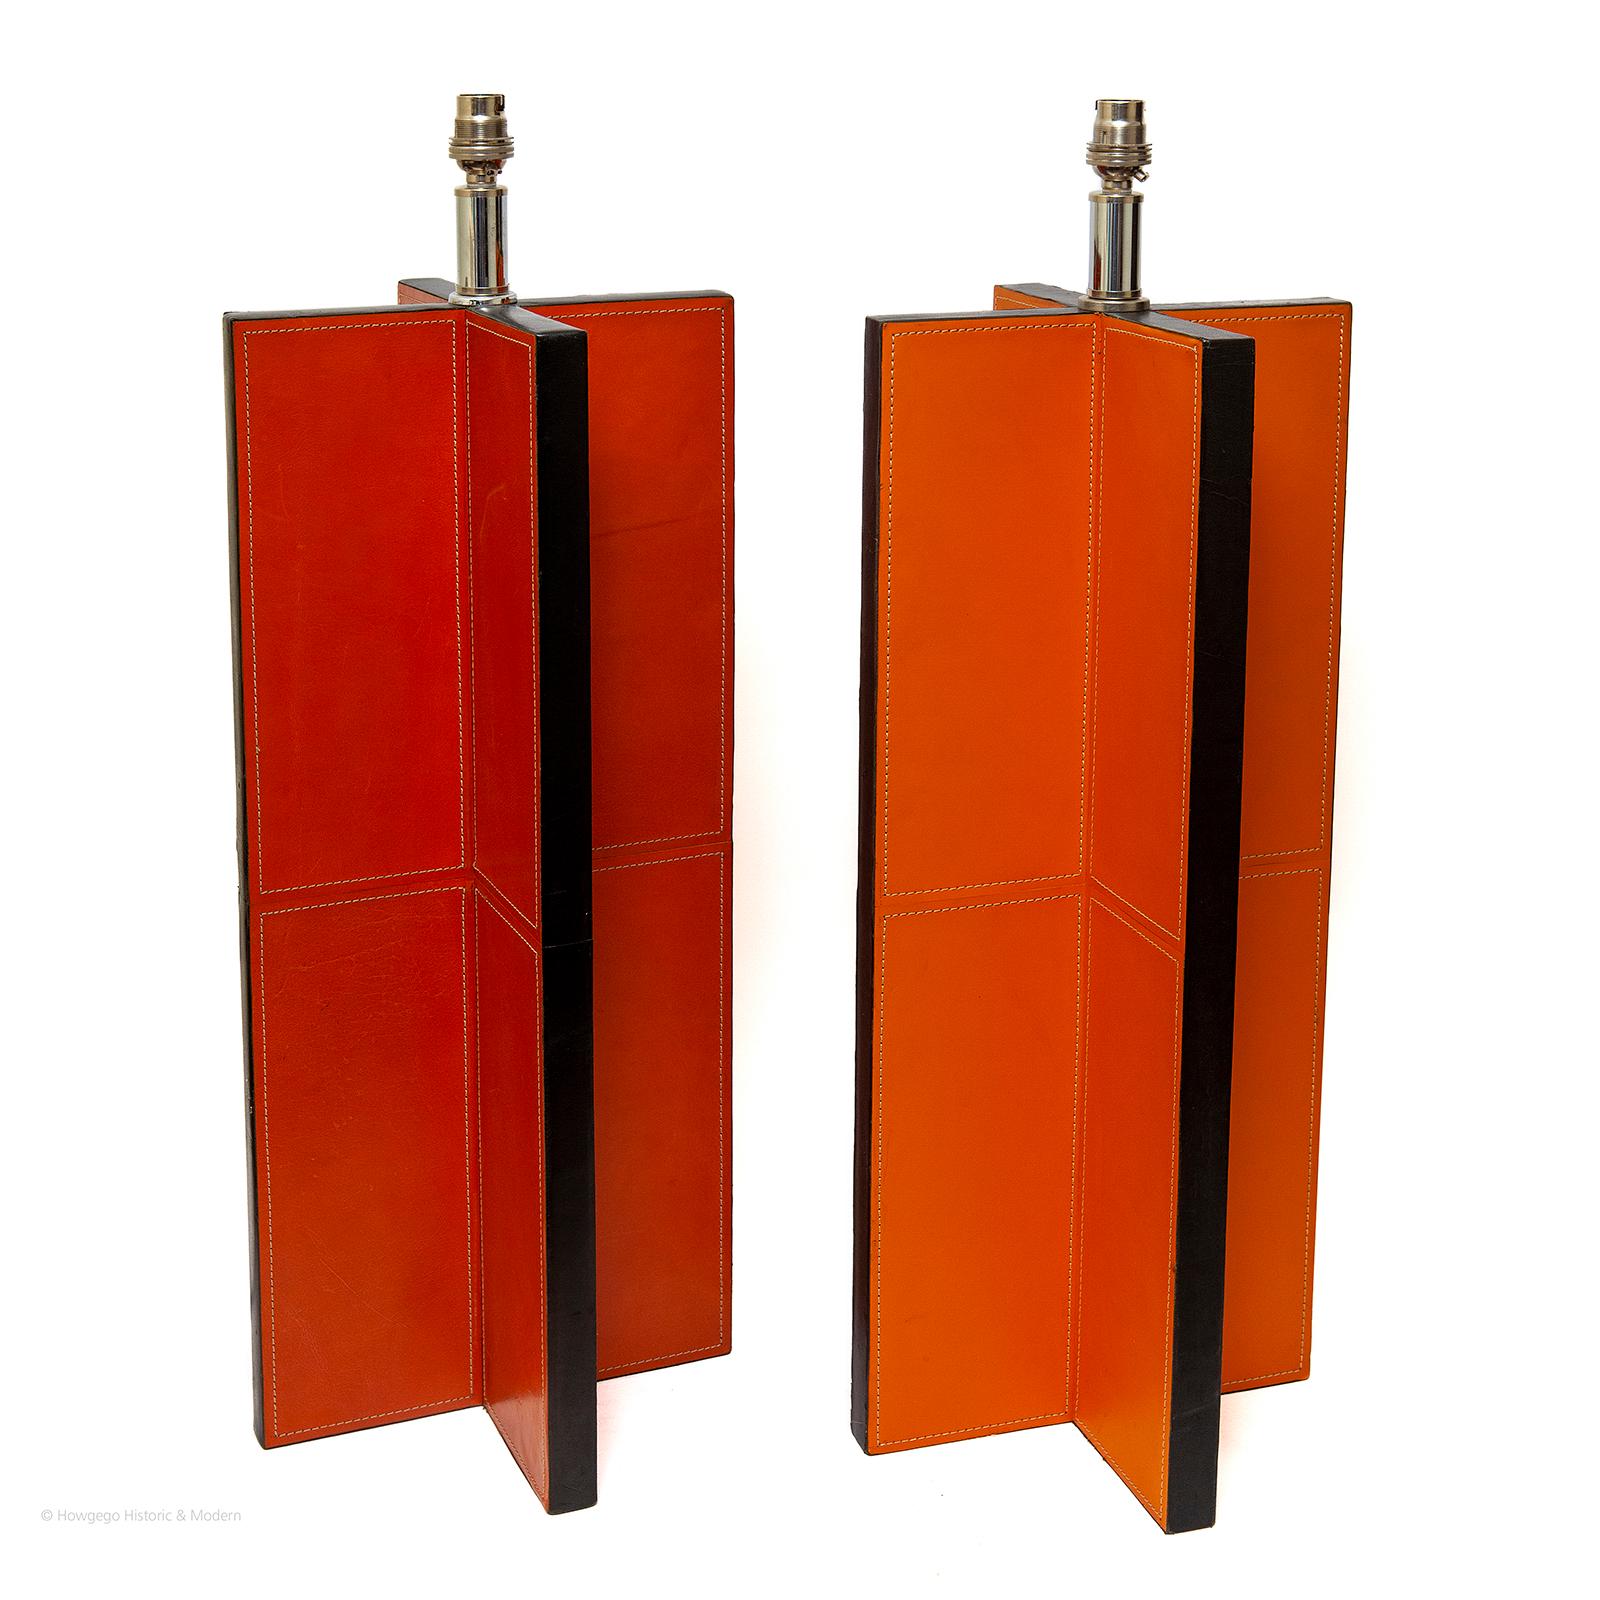 UNUSUAL & STRIKING PAIR OF TALL, VINTAGE, ORANGE, LEATHER TABLE LAMPS, 28” HIGH, INSPIRED BY JEAN MICHEL FRANK’S 1928, CROISILLON LAMP
Injecting bold colour and vibrancy into the interior
These lamps make a bold statement with their classic, simple